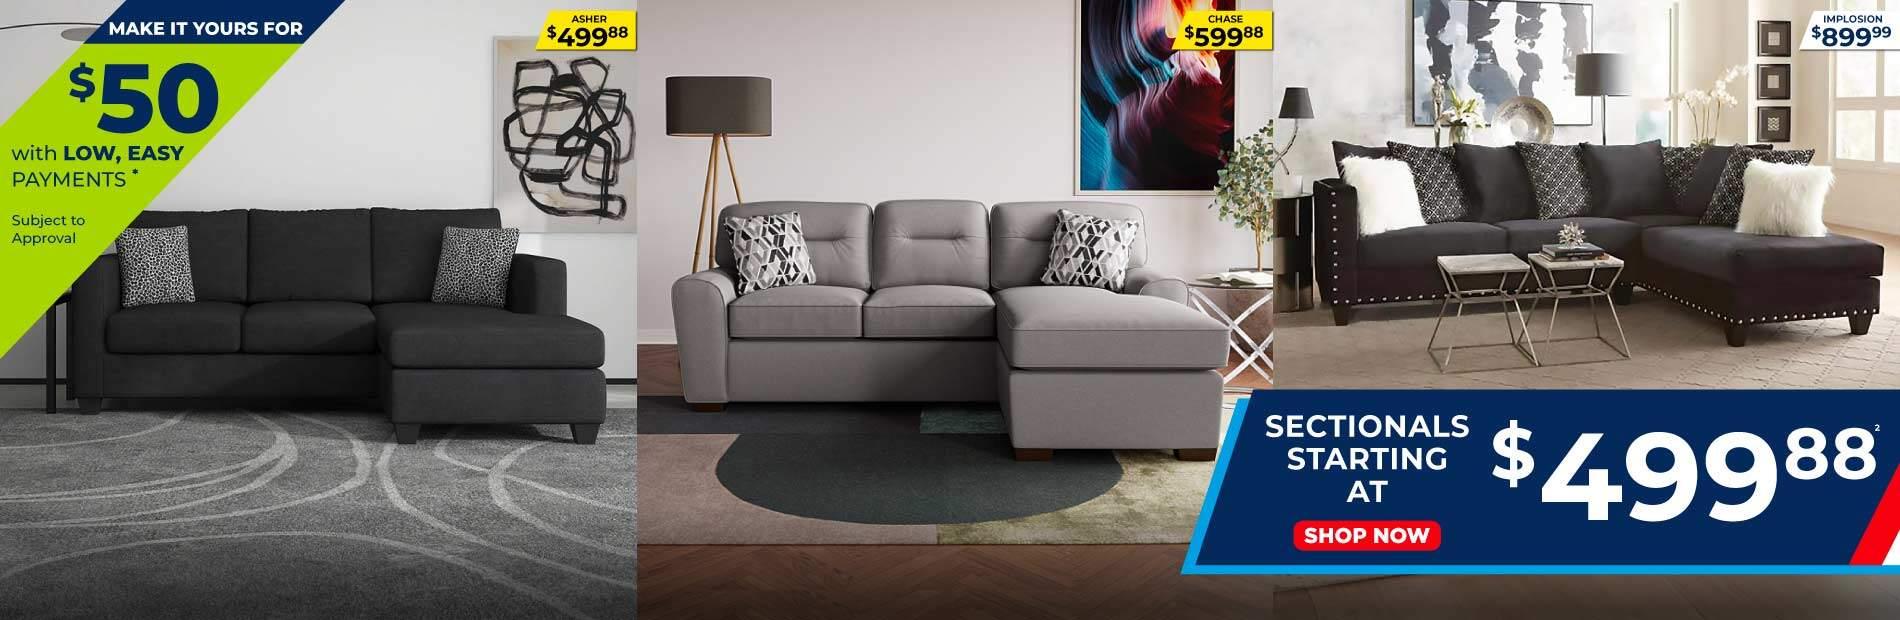 Make it yours for $50 with low, easy payments* subject to approval. Sectionals starting at $499.88. 2. Shop Now. Asher $499.88. Chase $599.88. Implosion $899.99